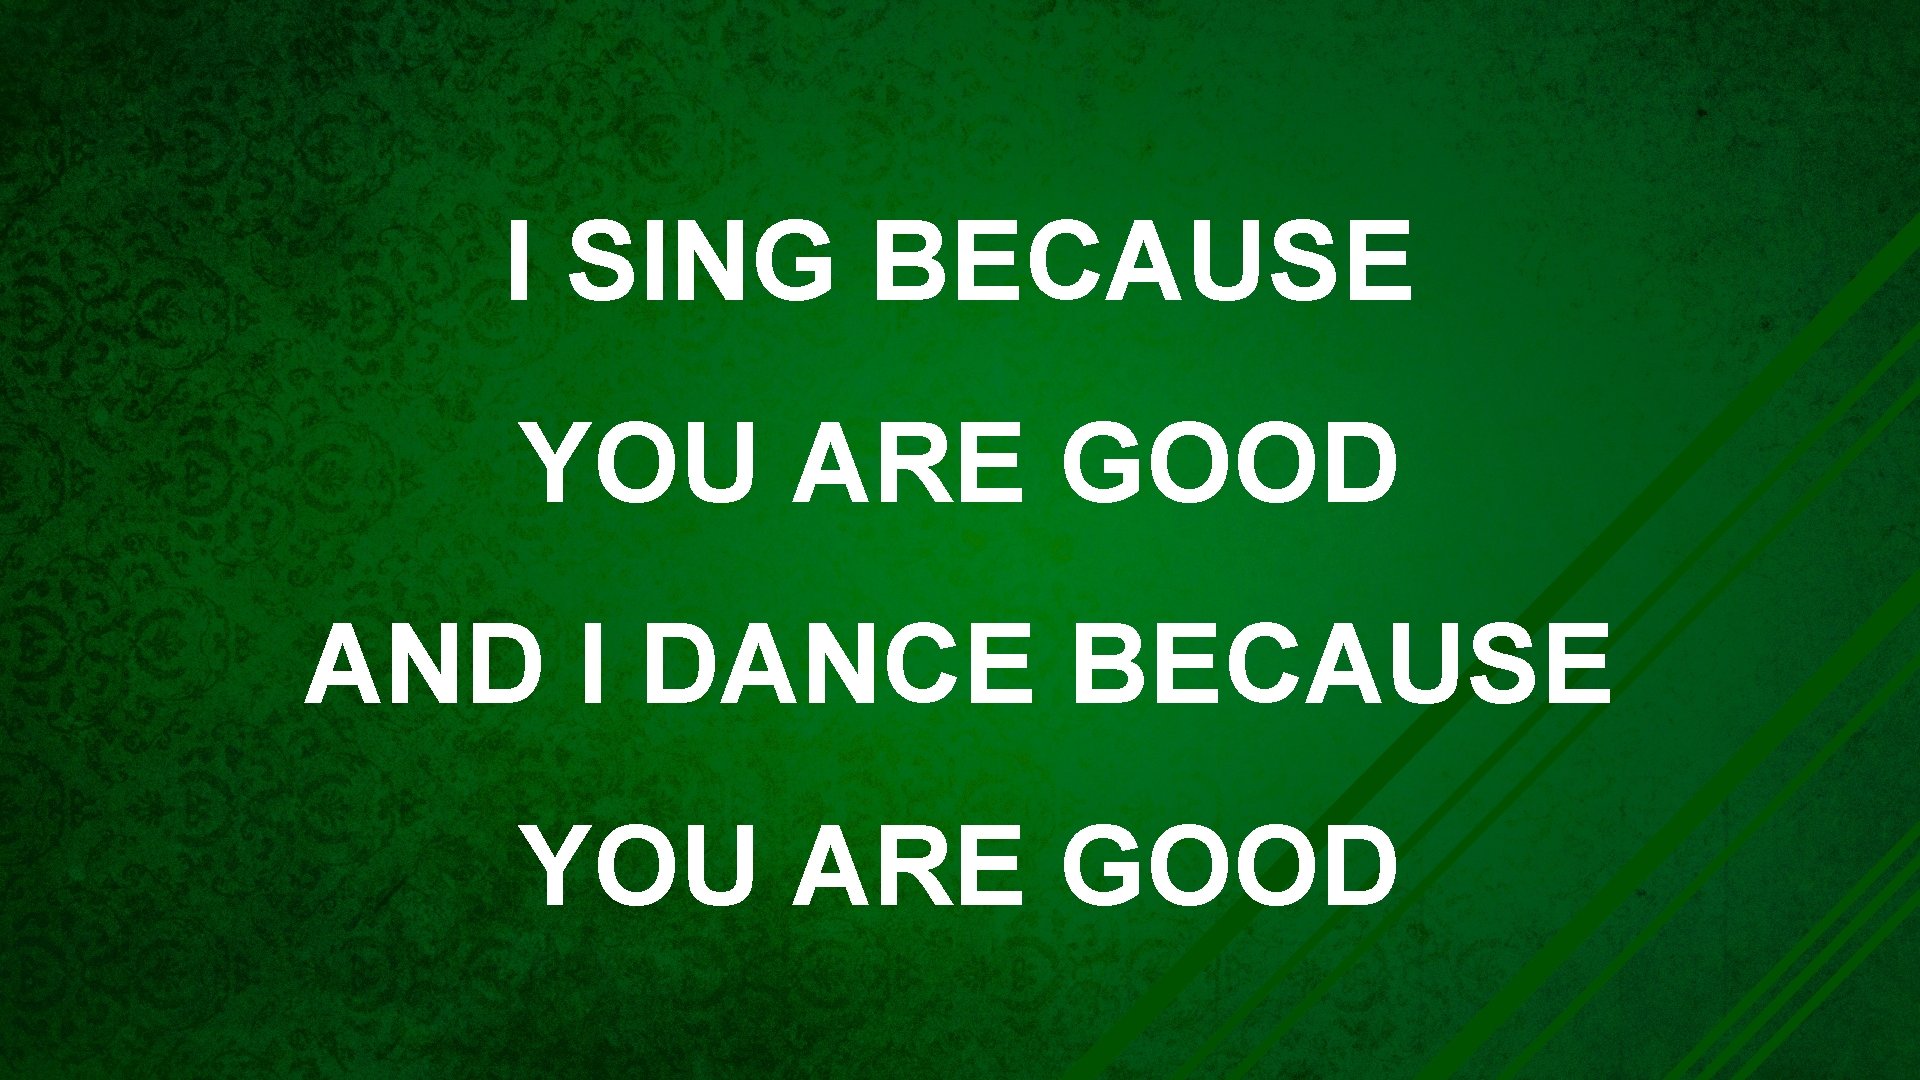 I SING BECAUSE YOU ARE GOOD AND I DANCE BECAUSE YOU ARE GOOD 